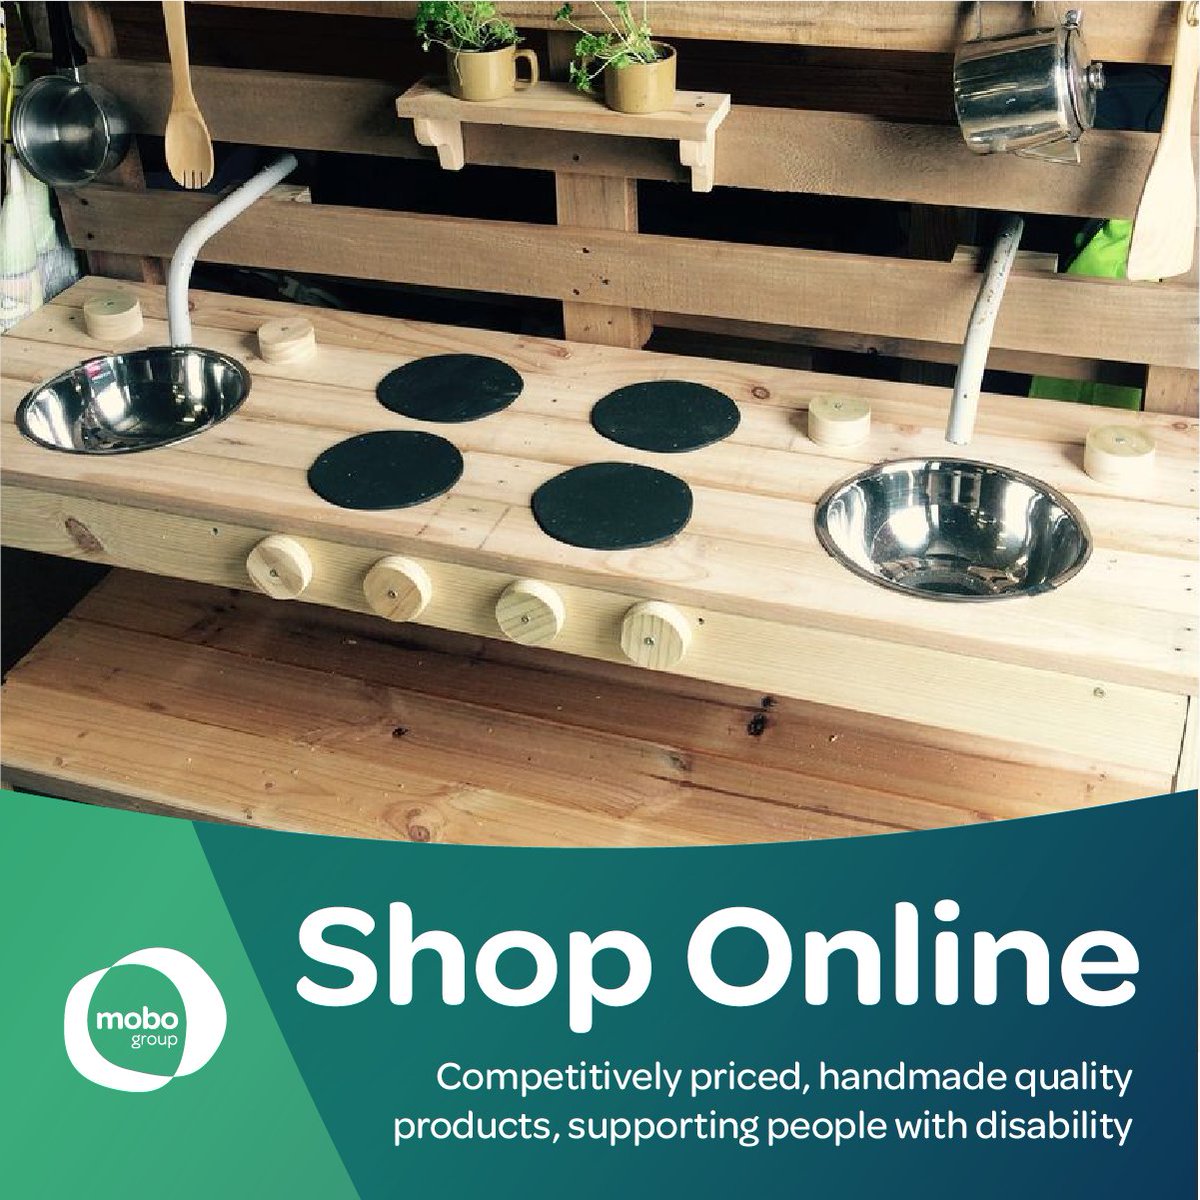 Mobo shop page is the perfect place to find sustainable, high-quality, and competitively priced products, all while supporting the lives of those with disability!

mobogroup.com.au/store-main.aspx 

#Mobo #shoplocal #shoponline #salvageandsave #institches #handmadewithlove #disability